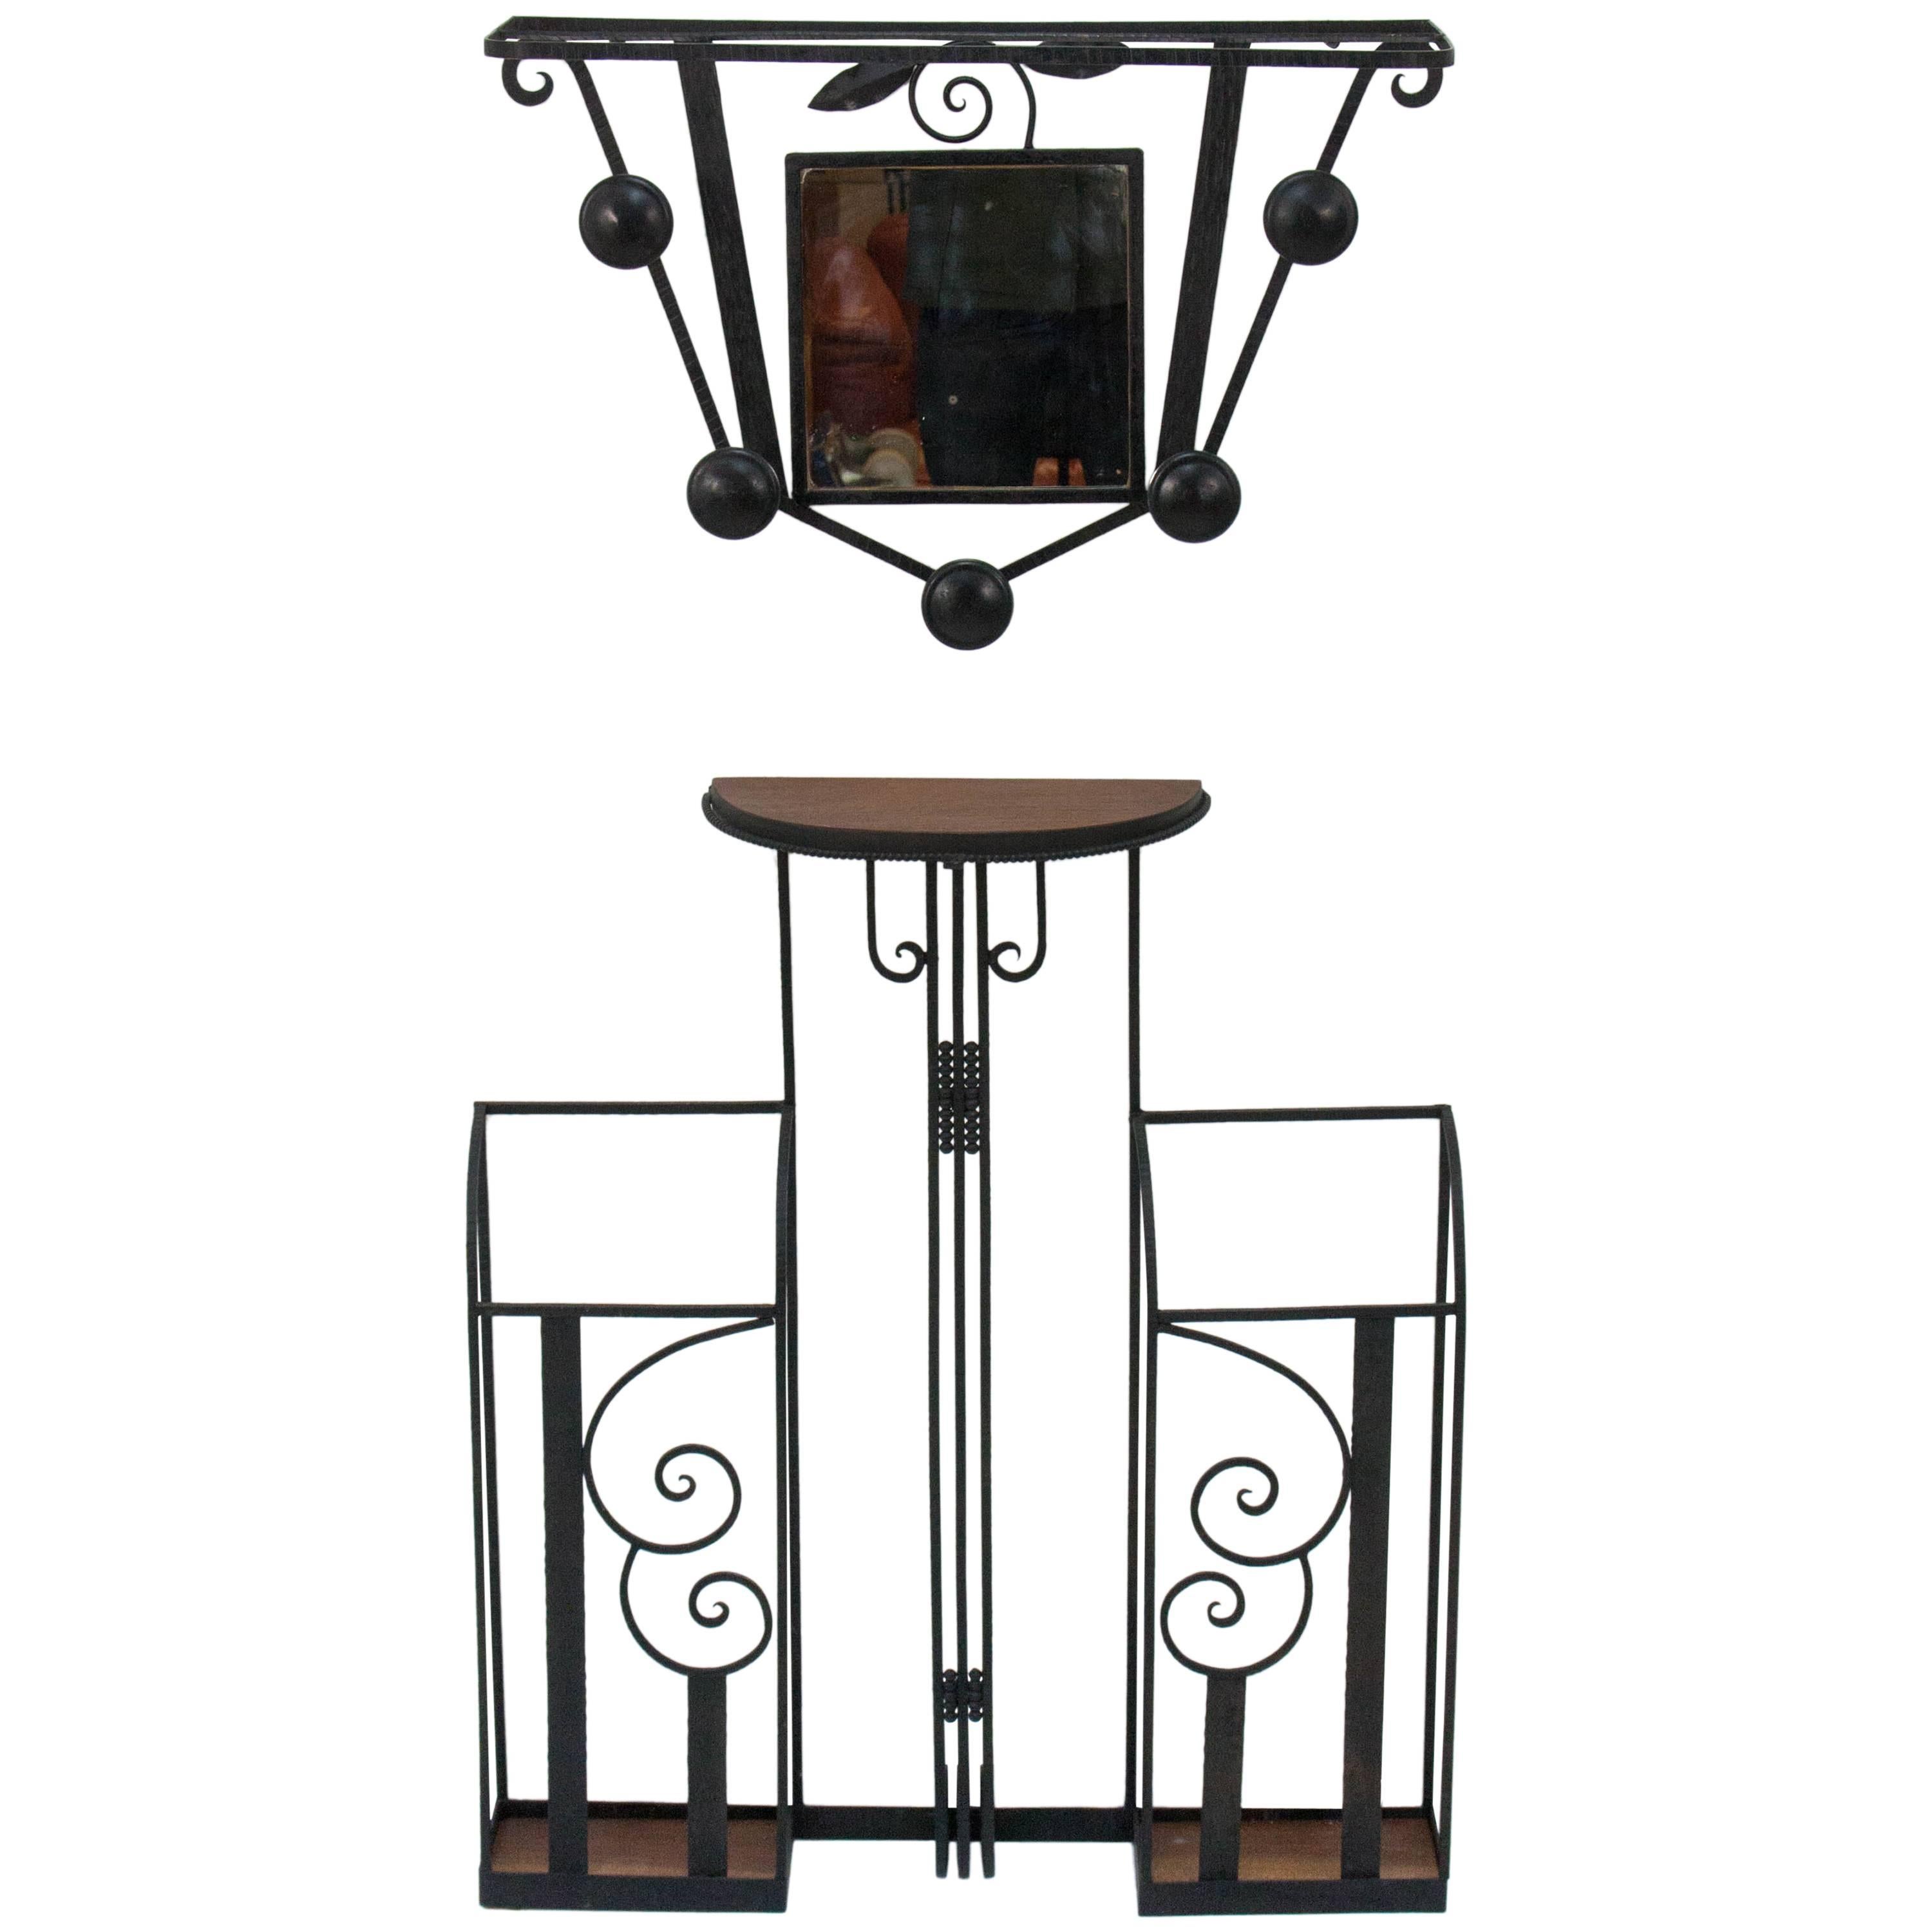 Graceful Art Deco wall-mounted hallway set consisting of an umbrella stand and a coat rack incorporating a small mirror. Cast iron and oak.

The lower umbrella stand part is 86cm tall, 72.5cm wide and 17cm deep, the upper coatrack part is 41cm